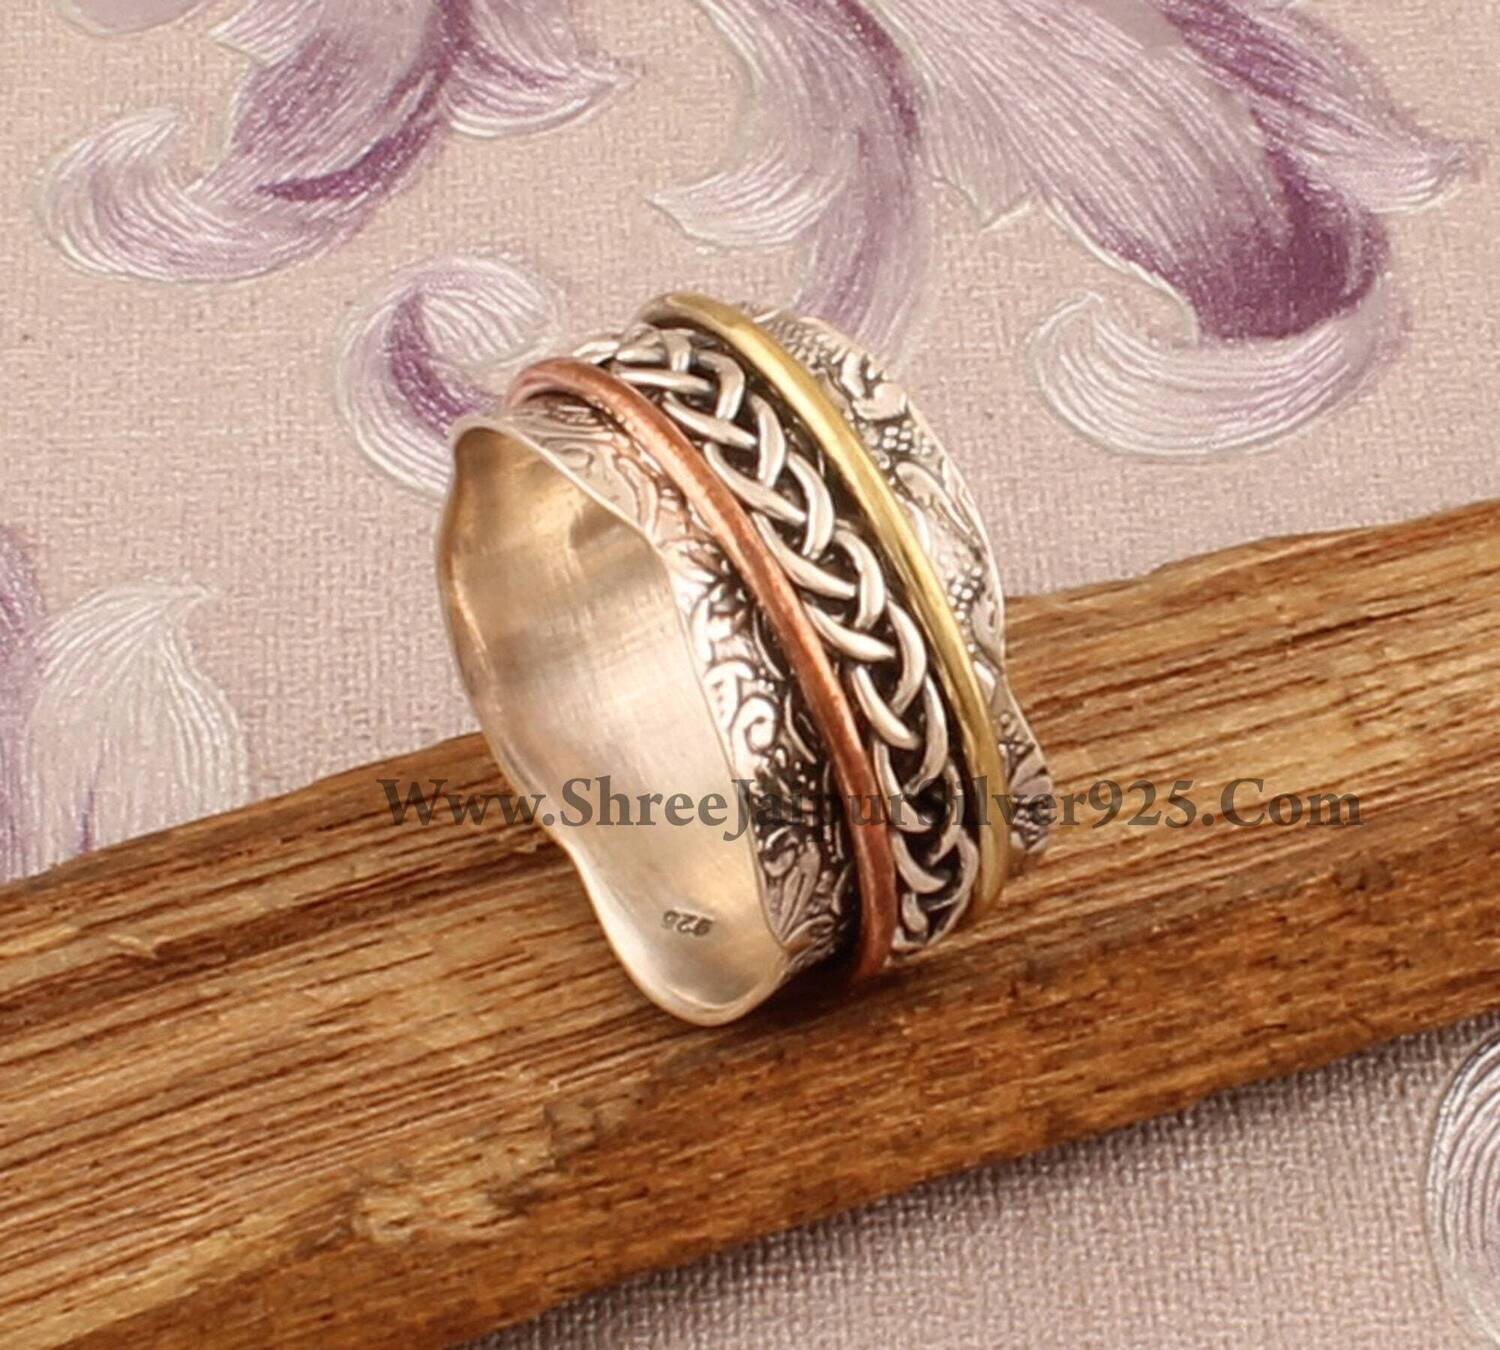 925 Sterling Silver Braided Spinner Ring, Handmade Three Tone Meditation Ring, Worry Carved Band Ring, Anxiety Rings Ring Gift Idea Jewelry